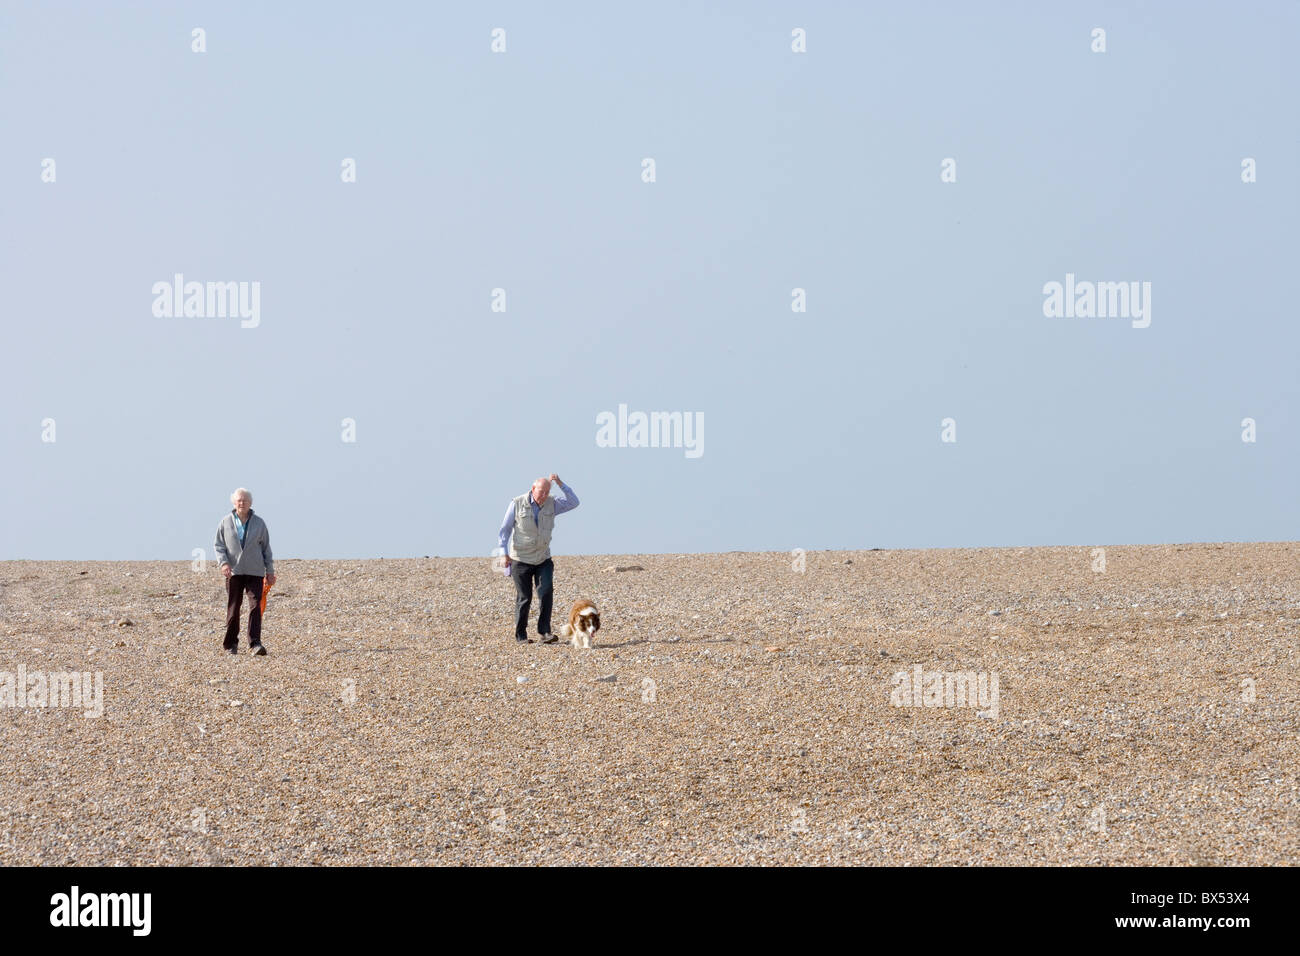 Recreation, exercise, dog walking on the beach. Cley, north Norfolk coast. Stock Photo